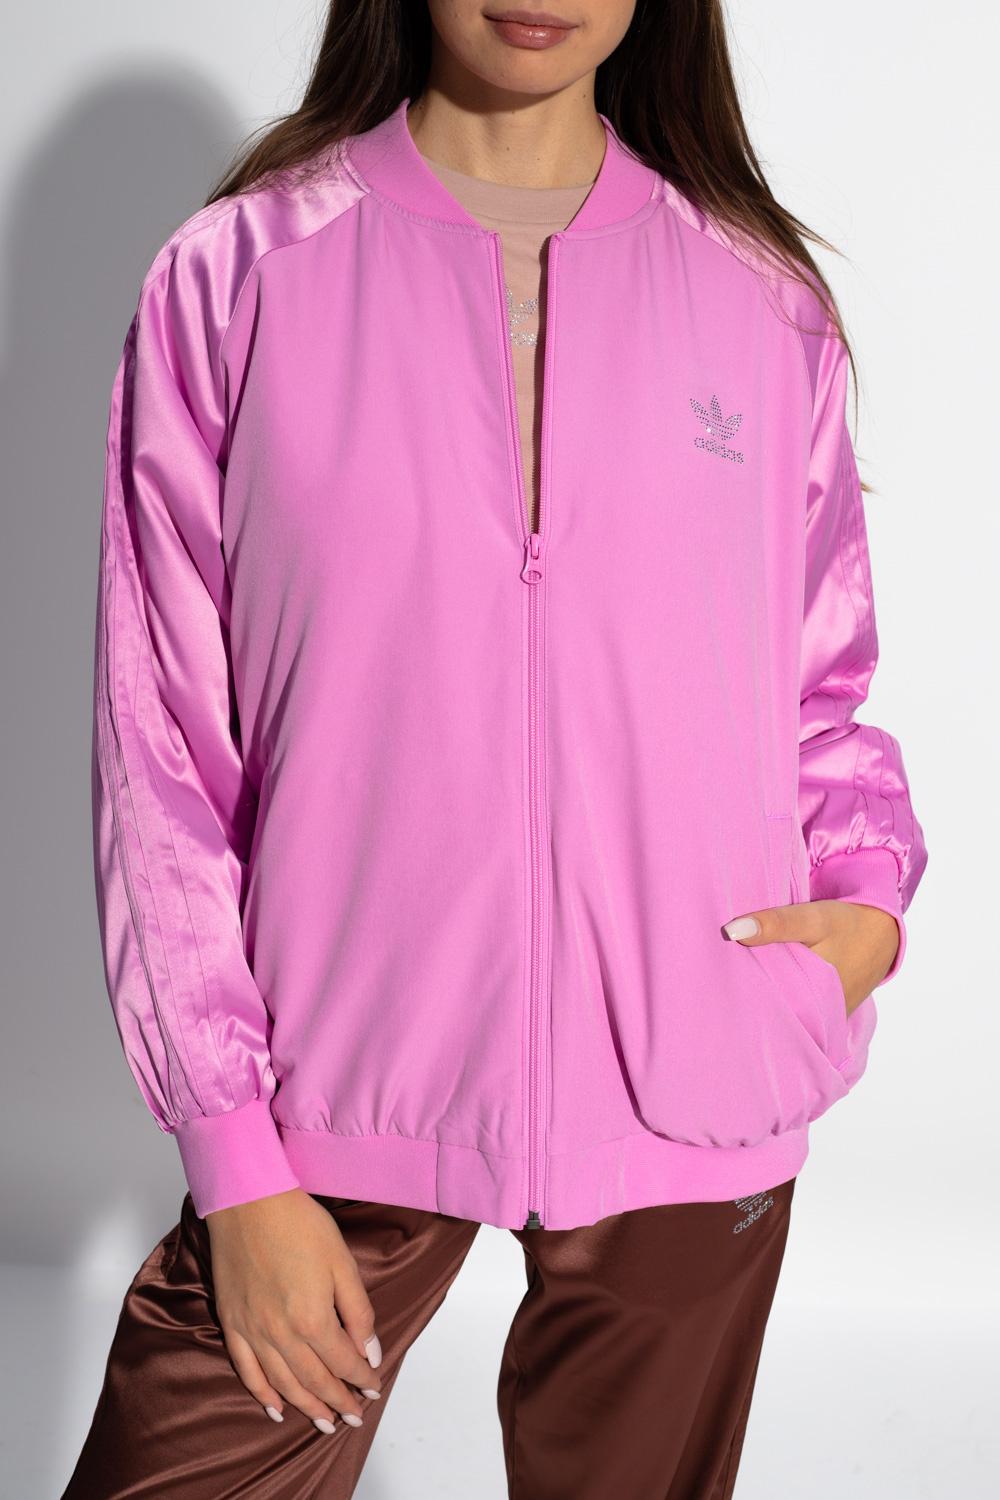 adidas Originals Bomber Jacket With Logo in Pink - Lyst